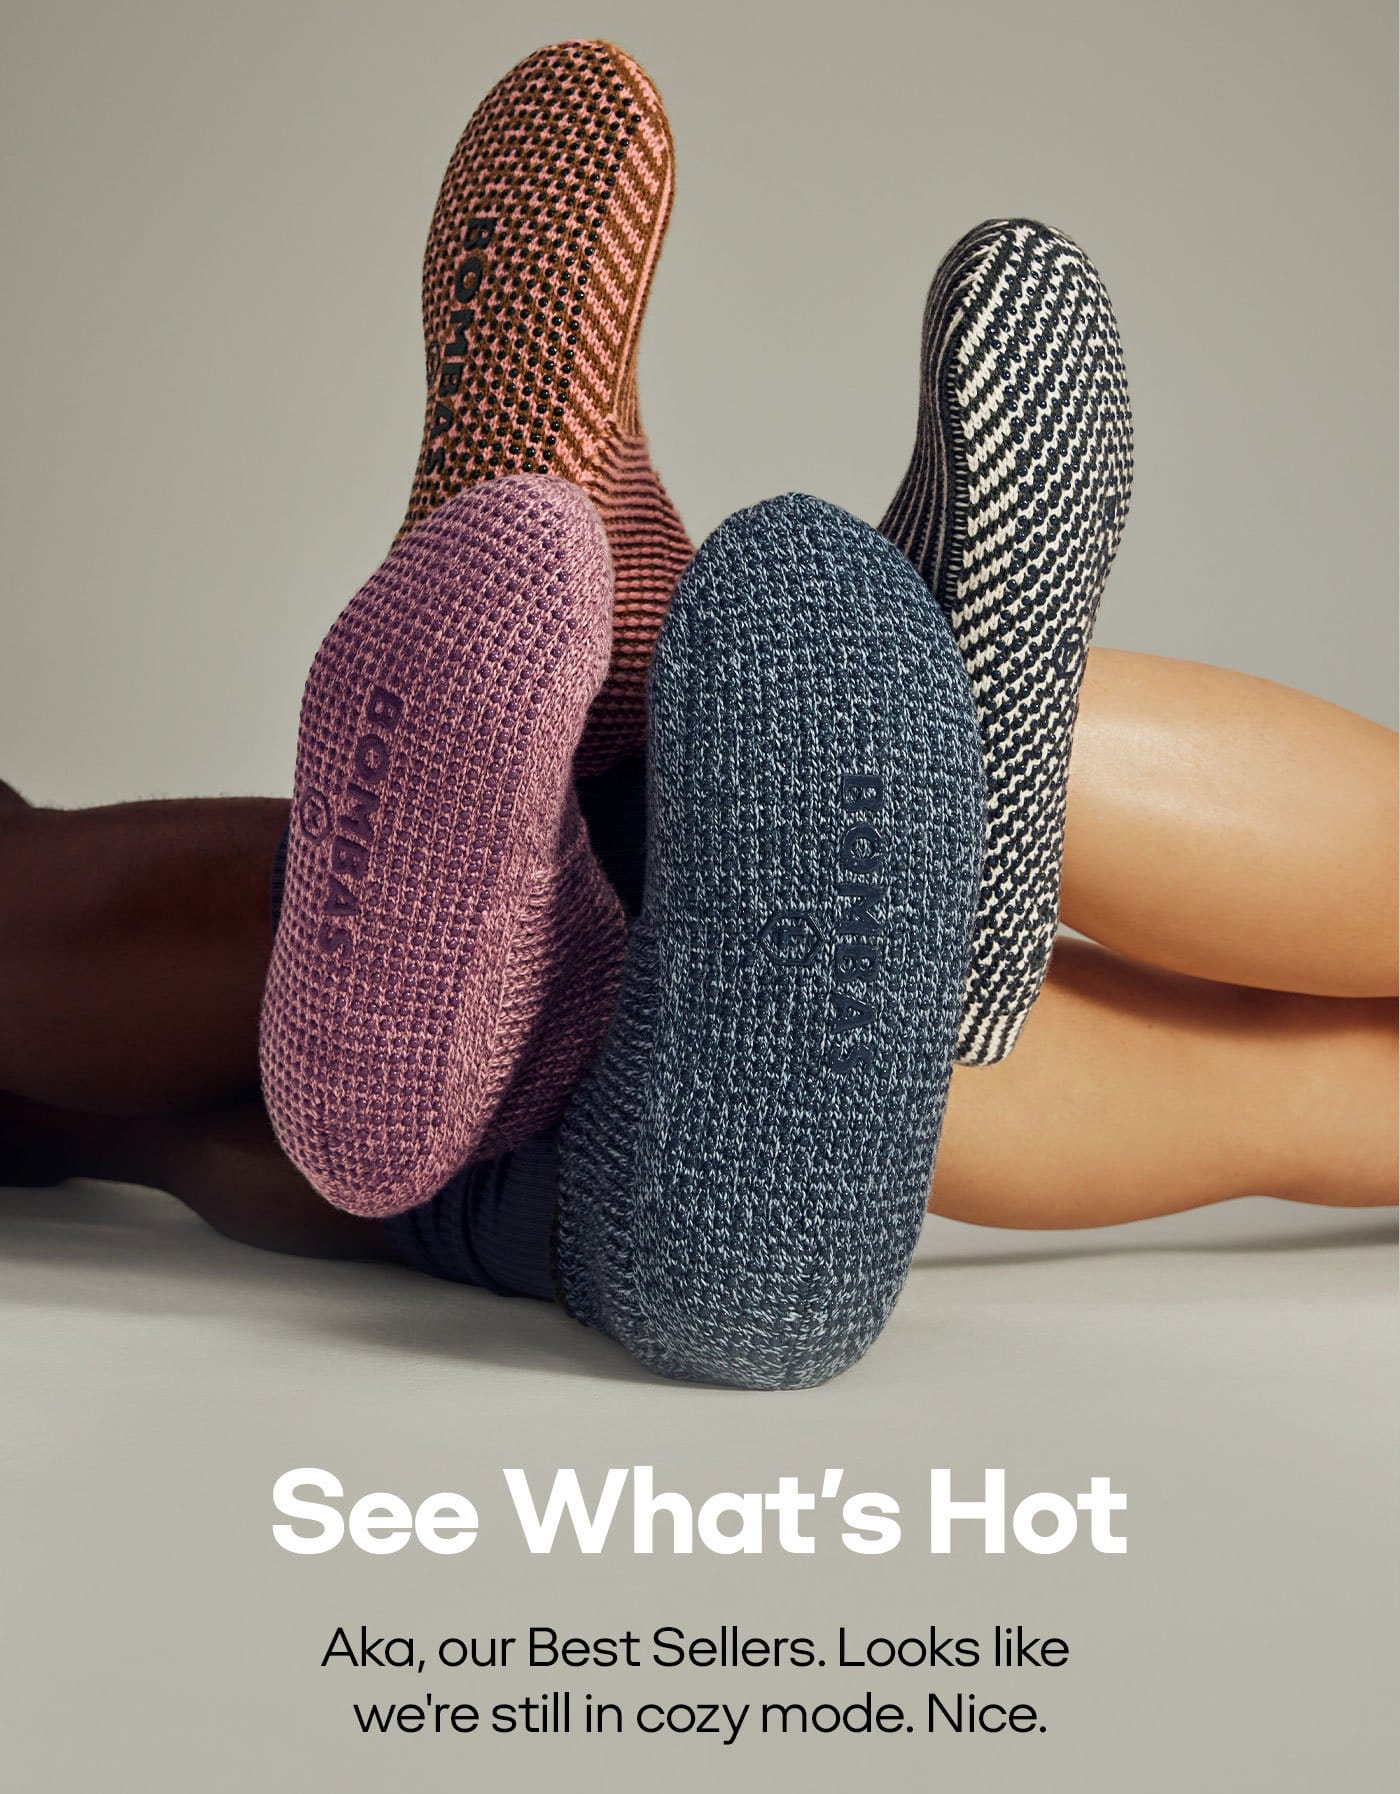 See What's Hot | Check out our Best Sellers to see what everyone's wearing this season.